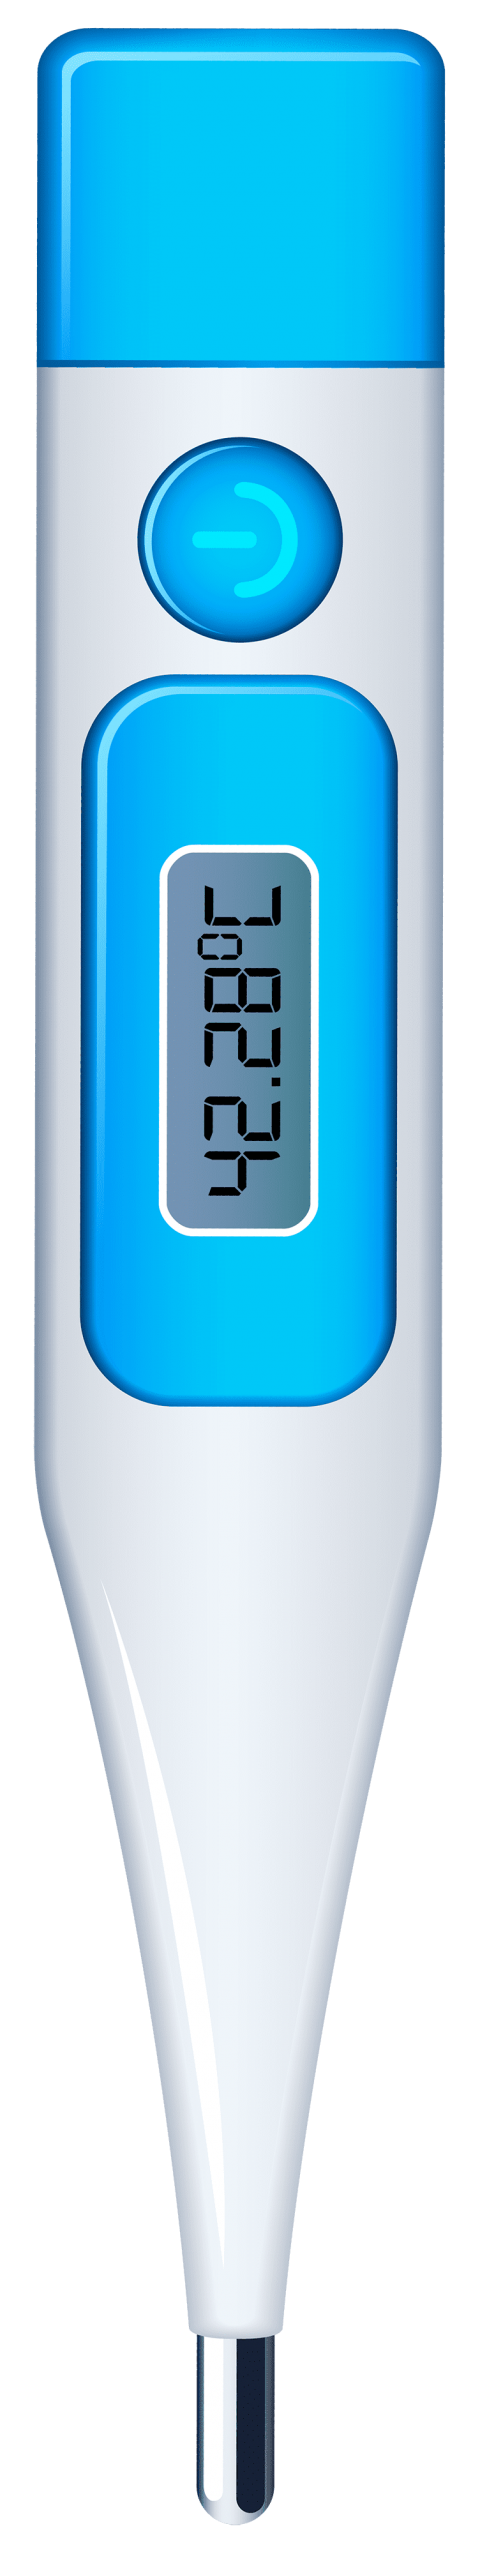 clipart thermometer transparent background